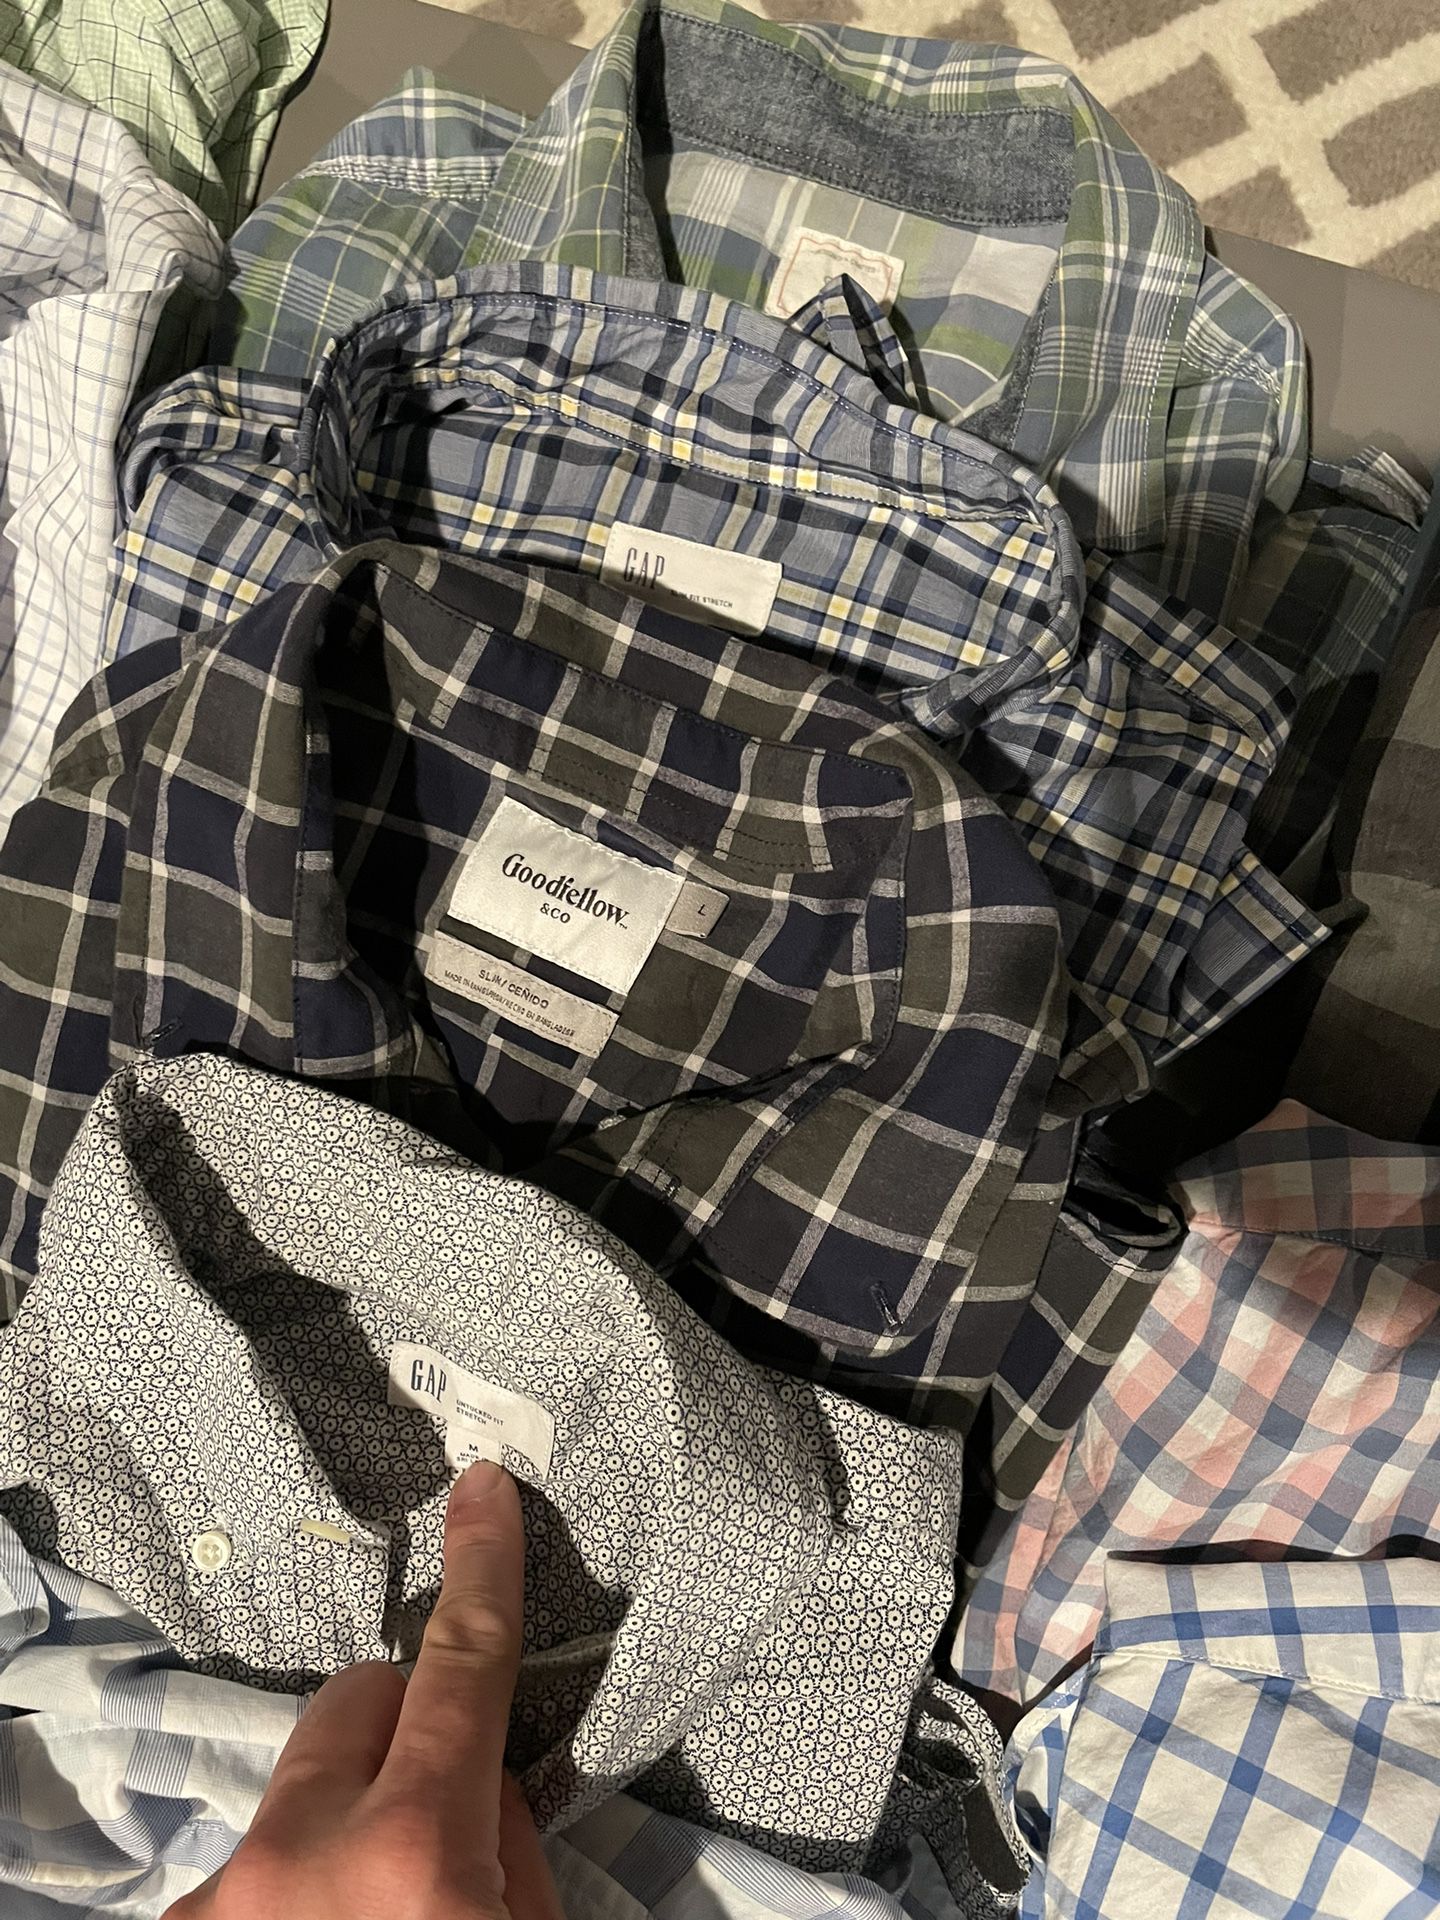 Thomas Pink Mens Dress Shirt 18-37 XXL for Sale in Roseville, CA - OfferUp